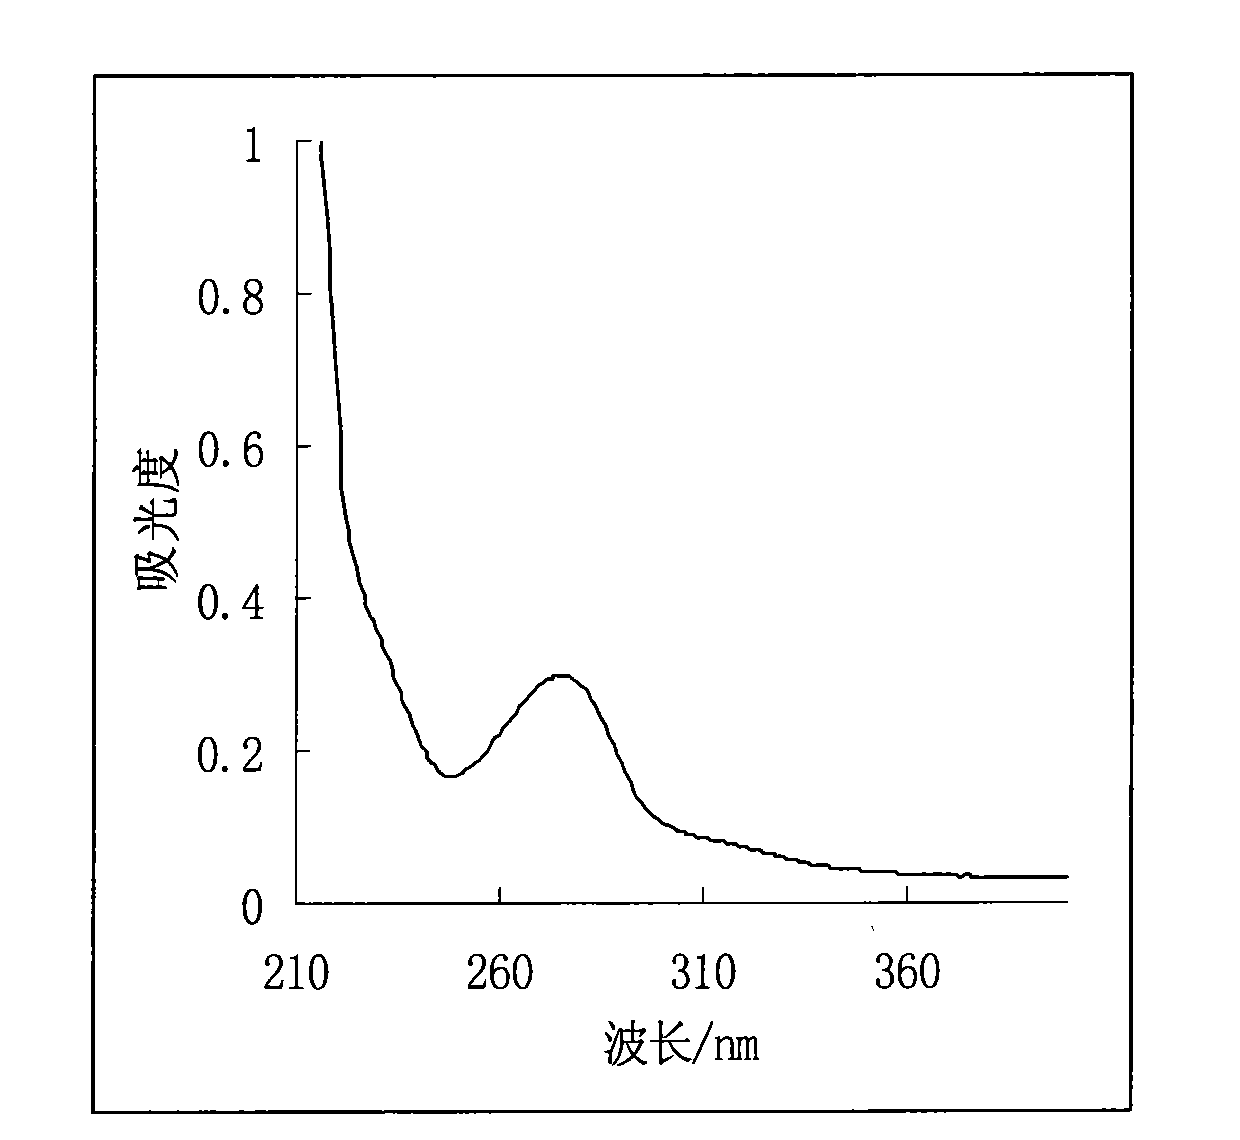 Method for fast measuring essence mixture ratio in cigarette